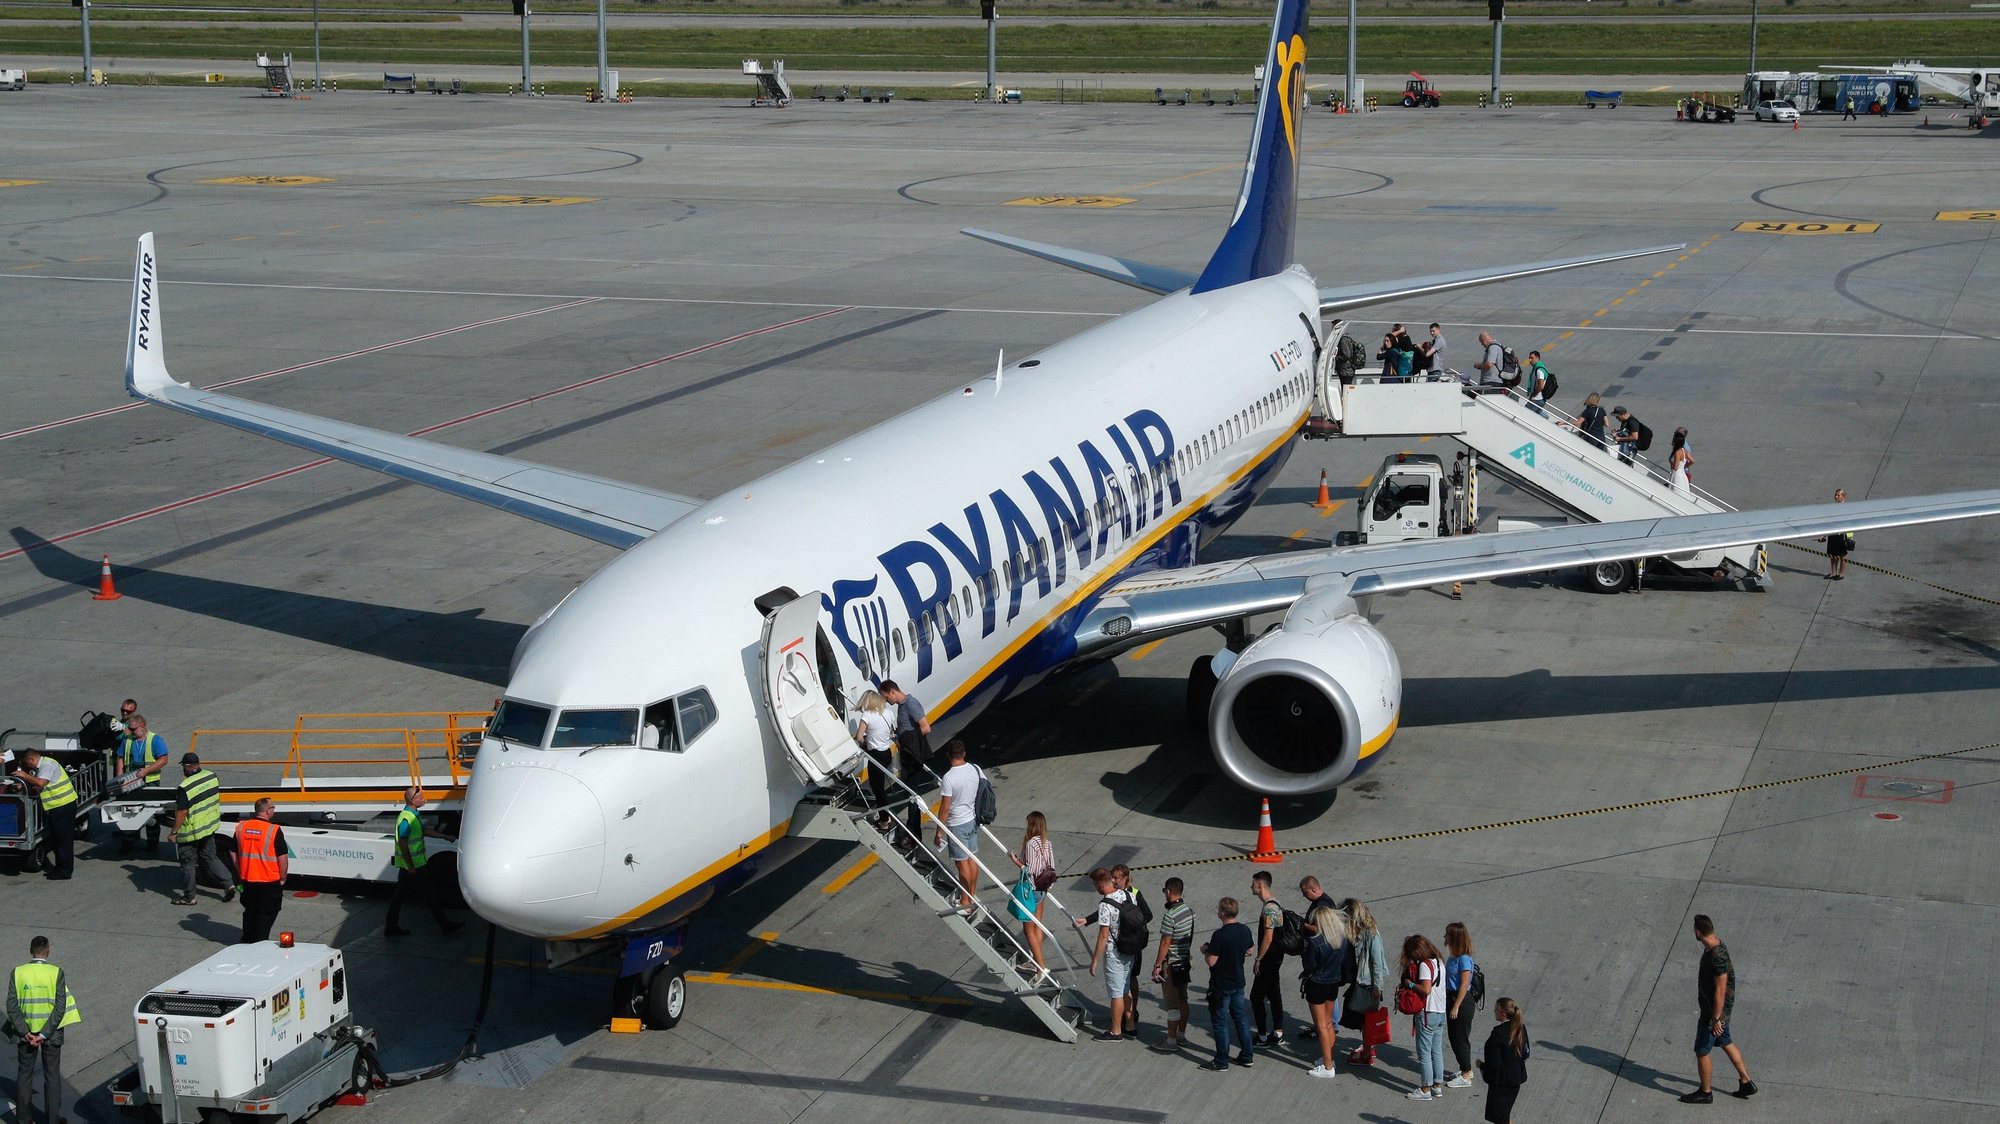 epa07747013 (FILE) - The passengers of the first flight Kiev - Berlin of the low coast airline Ryanair board the plane in Kiev&#039;s airport Boryspil, Ukraine, 03 September 2018, reissued 29 July 2019. Media reports state on 29 July 2019 that Ryanair saw its pre-tax profits fall by 24 percent in the first quarter of 2019, and said that its pre-tax profit for the three month period though to June 2019 came in at 262.3 million euros against 345.4 million euros 12 months ago.  EPA/SERGEY DOLZHENKO *** Local Caption *** 54957356